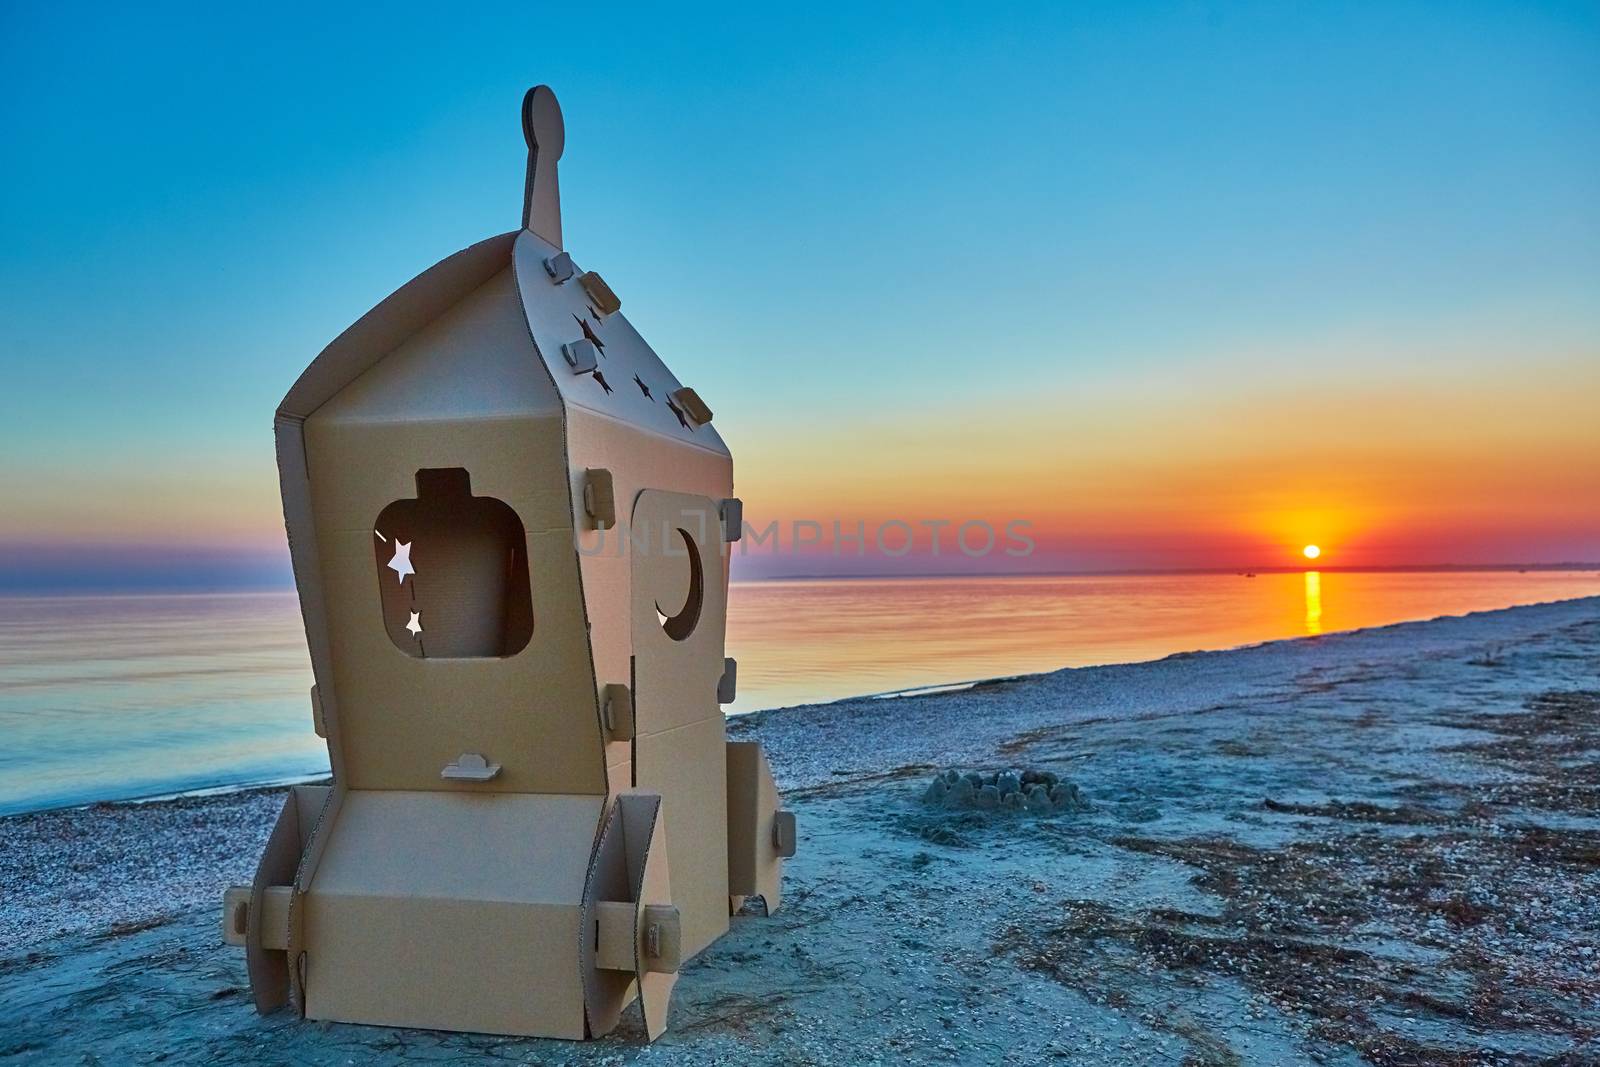 Cardboard toy spaceship at sea coast and sunset. Eco concept